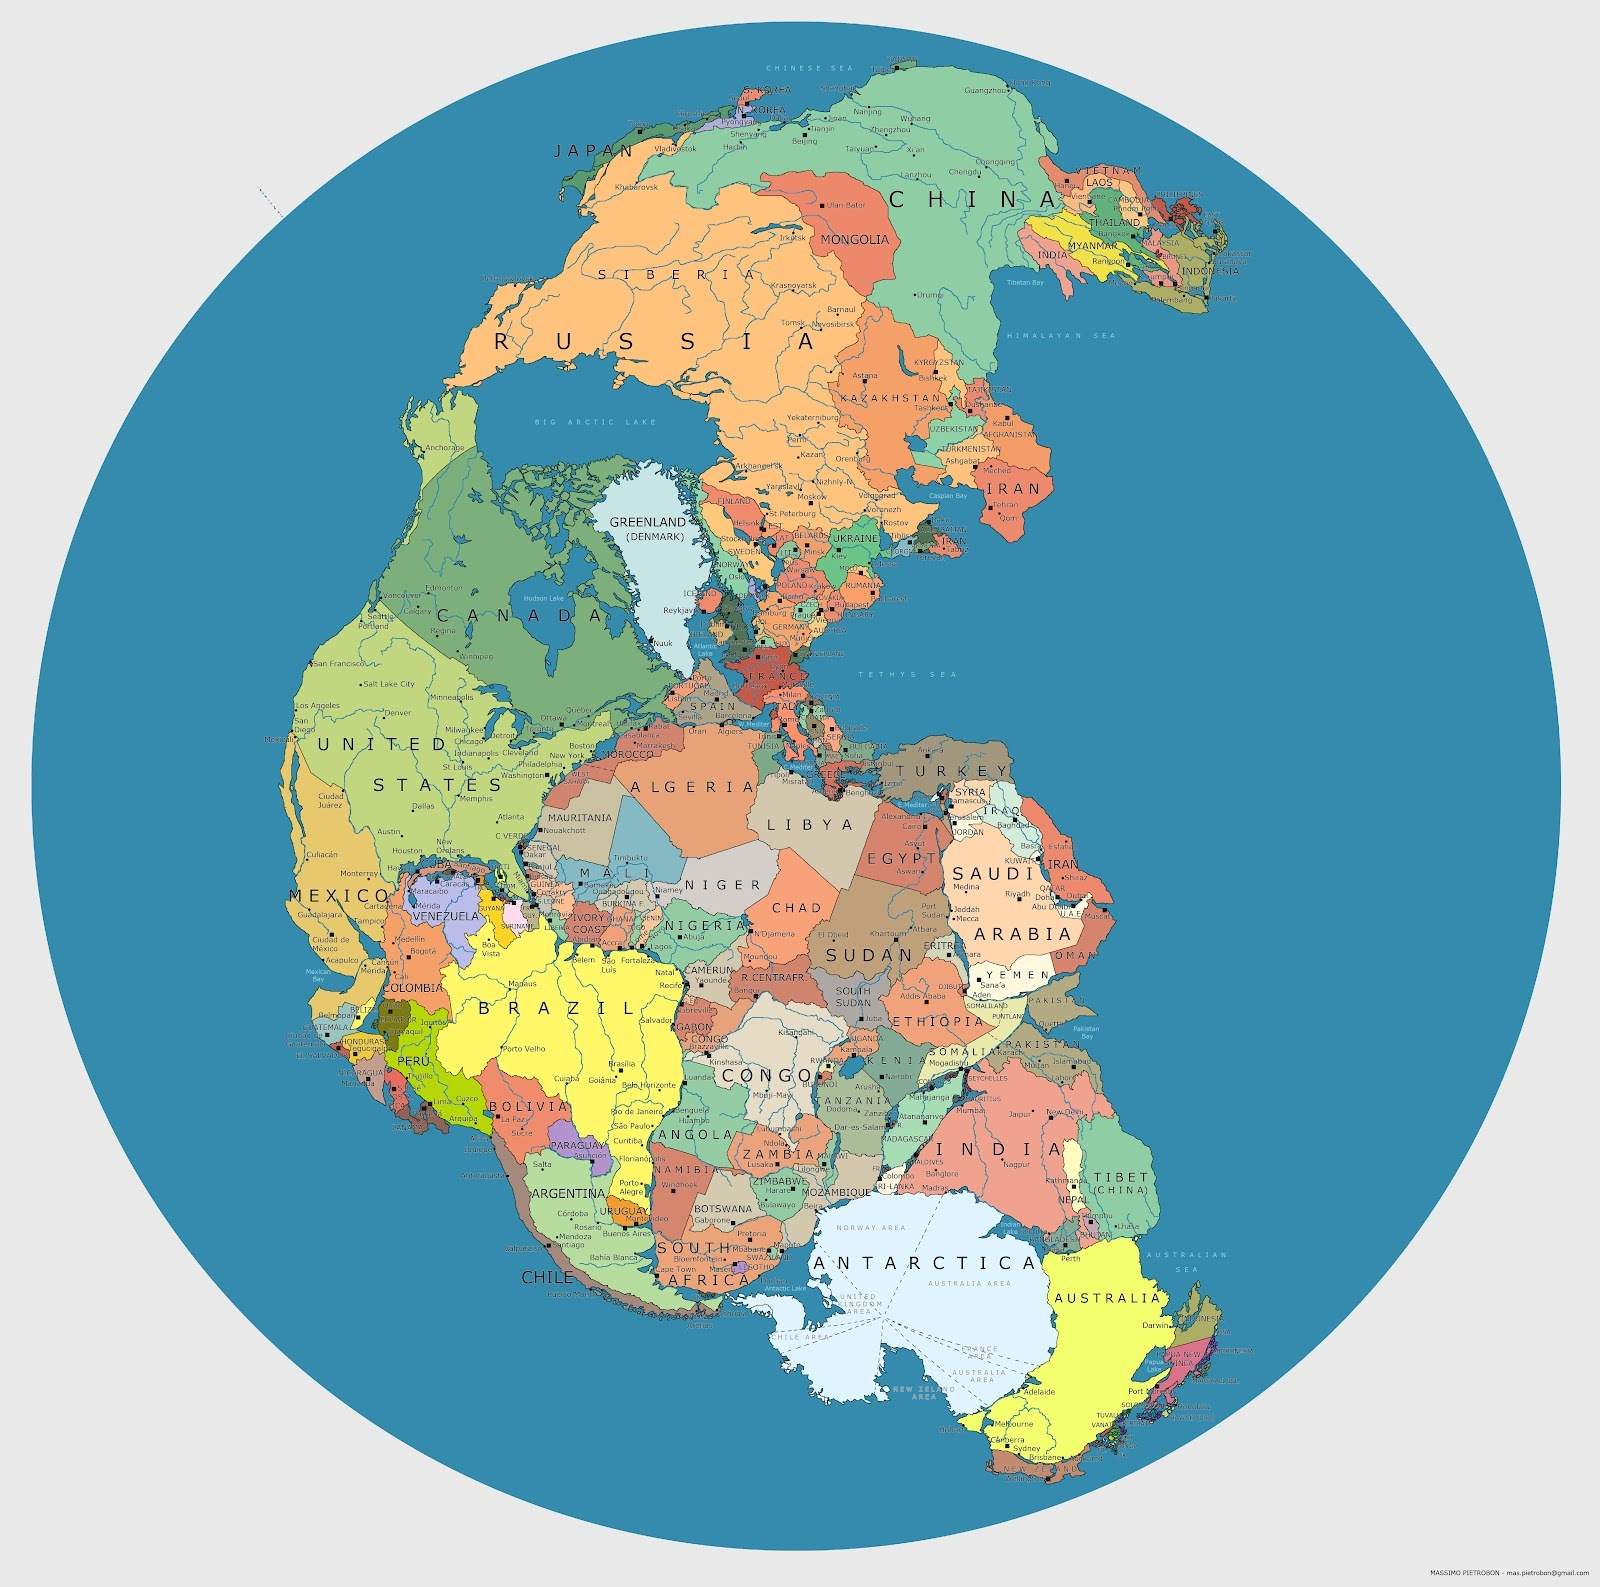 What Pangaea Would Look Like With Today’s Political Boundaries [Infographic]